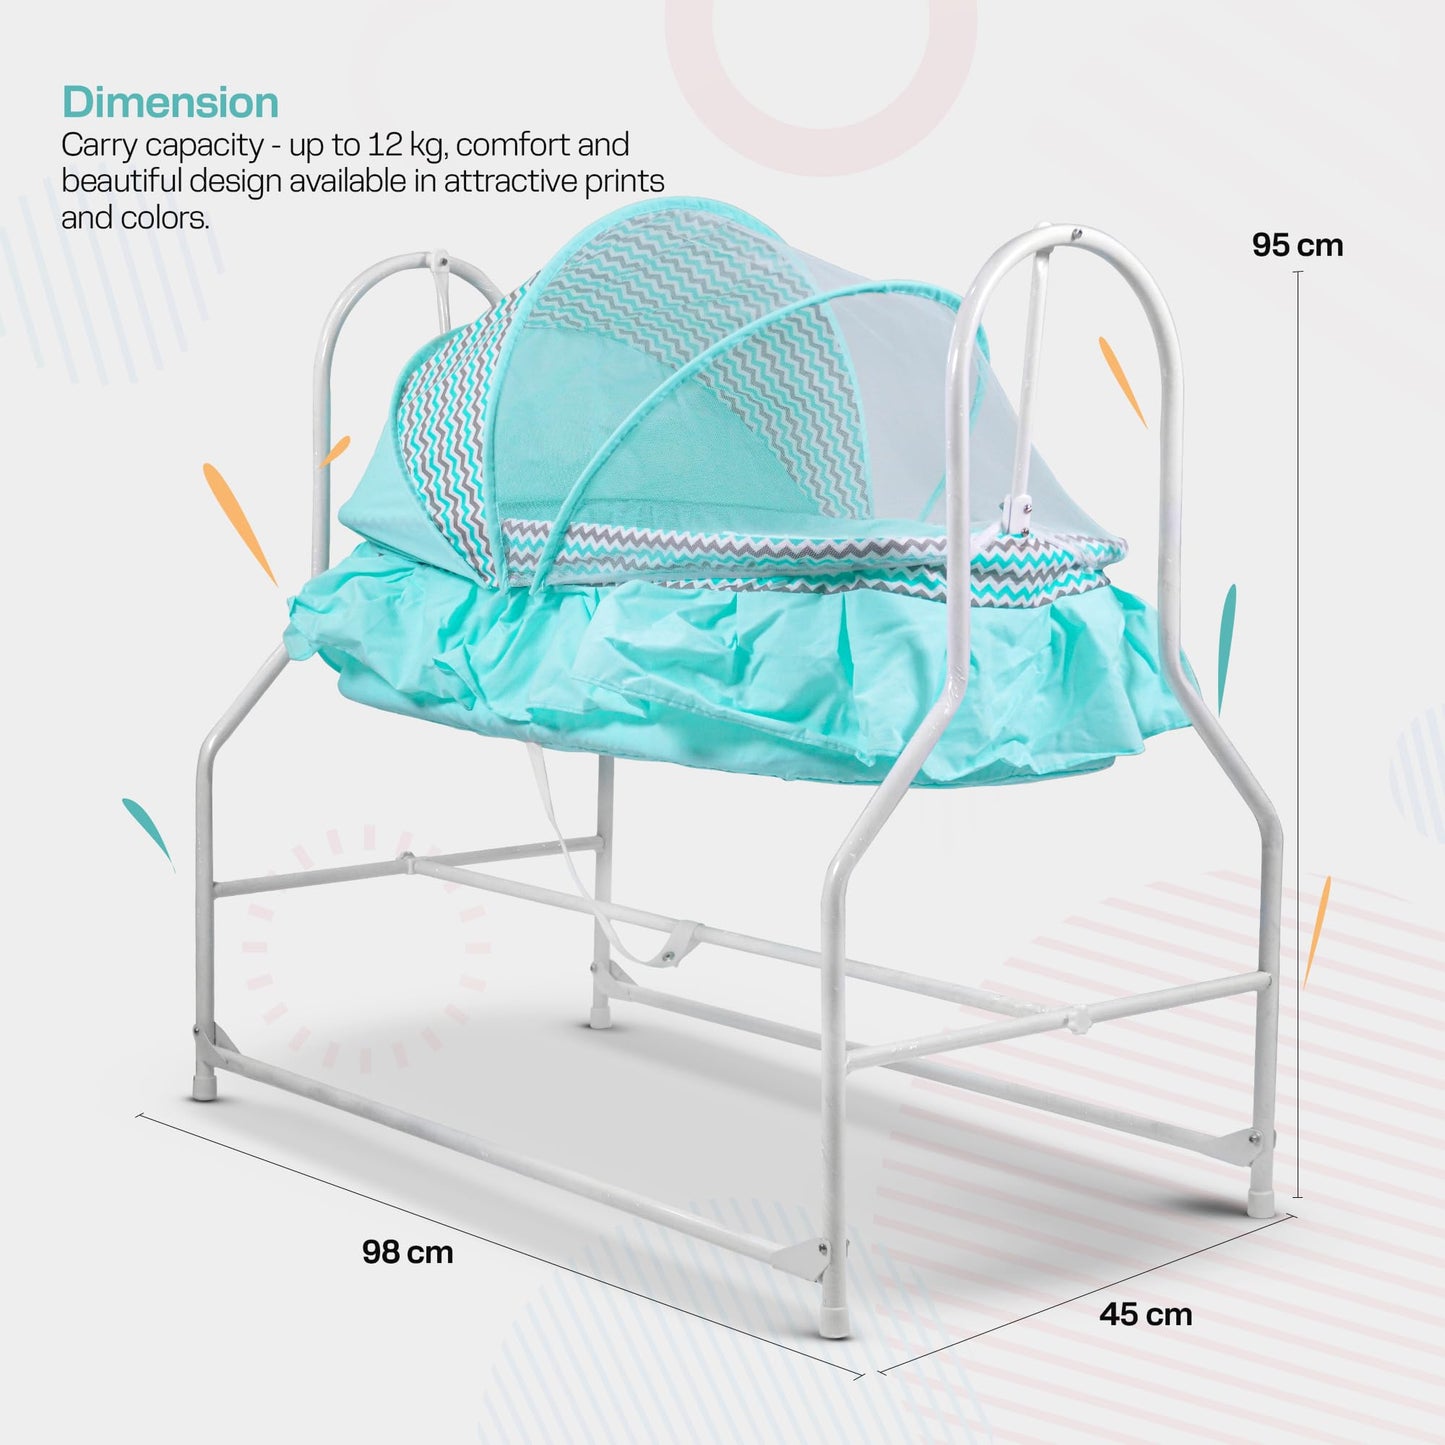 DreamSwing New Born Baby Swing Cradle with Mosquito Net